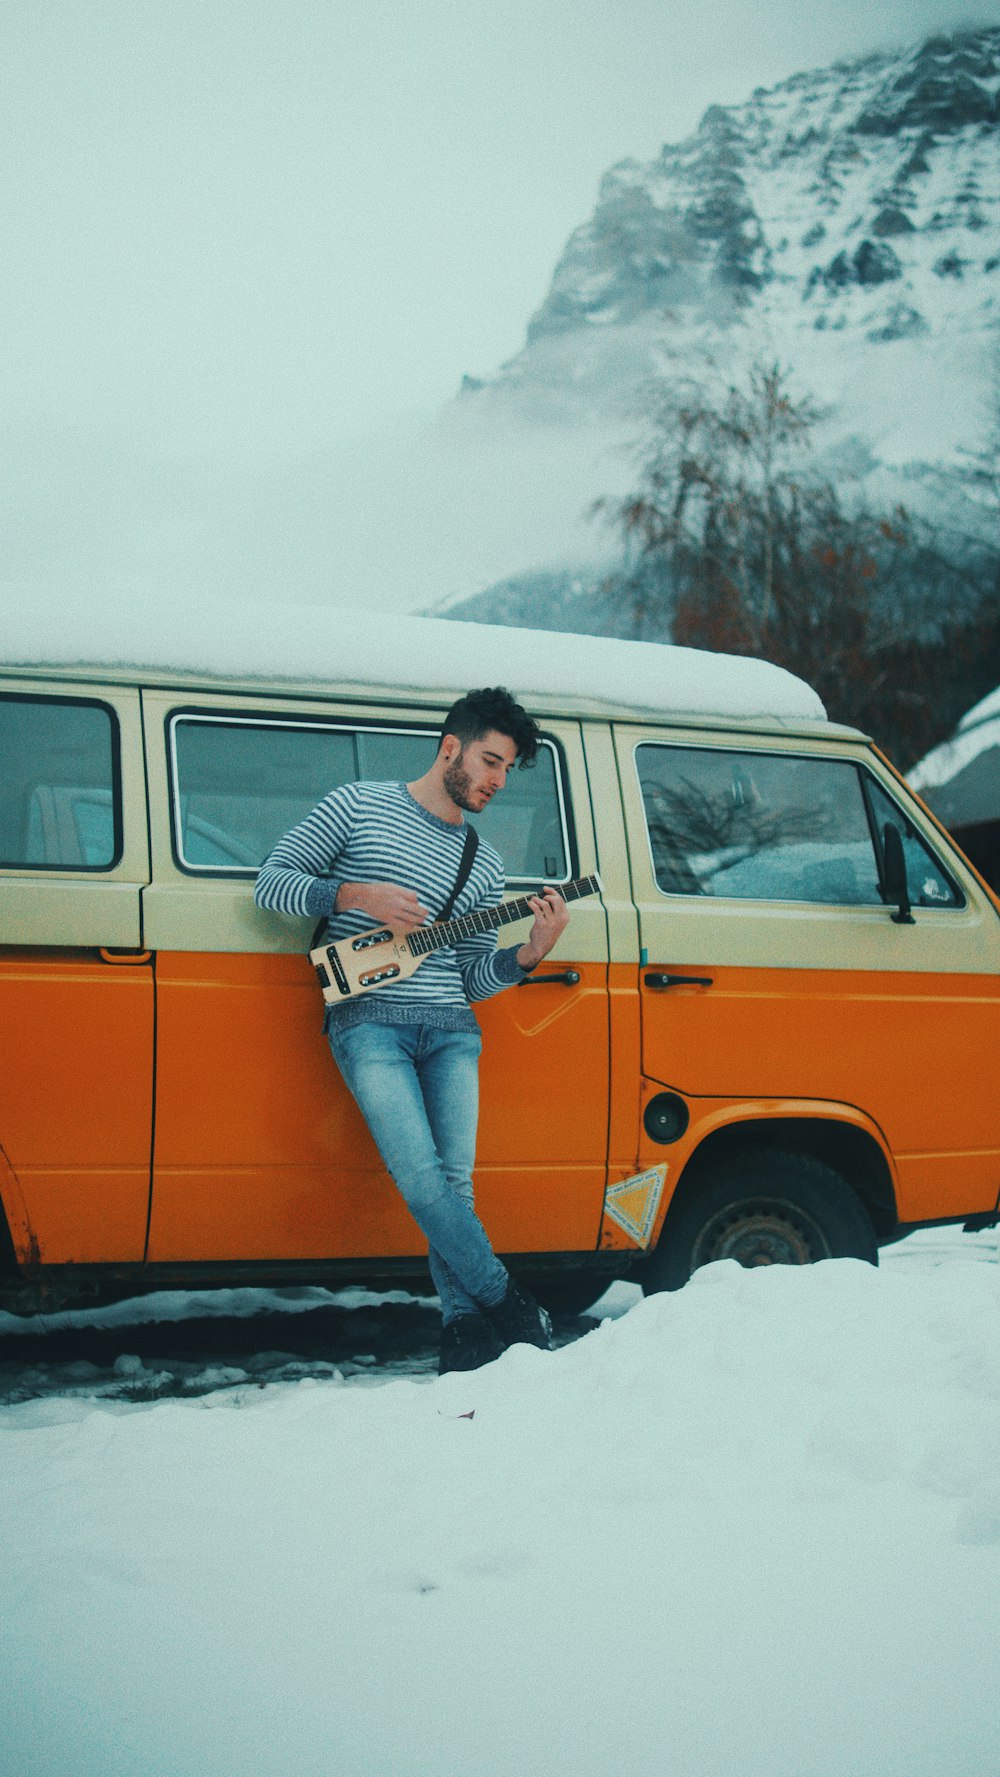 man leaning on vehicle while playing guitar under blue sky